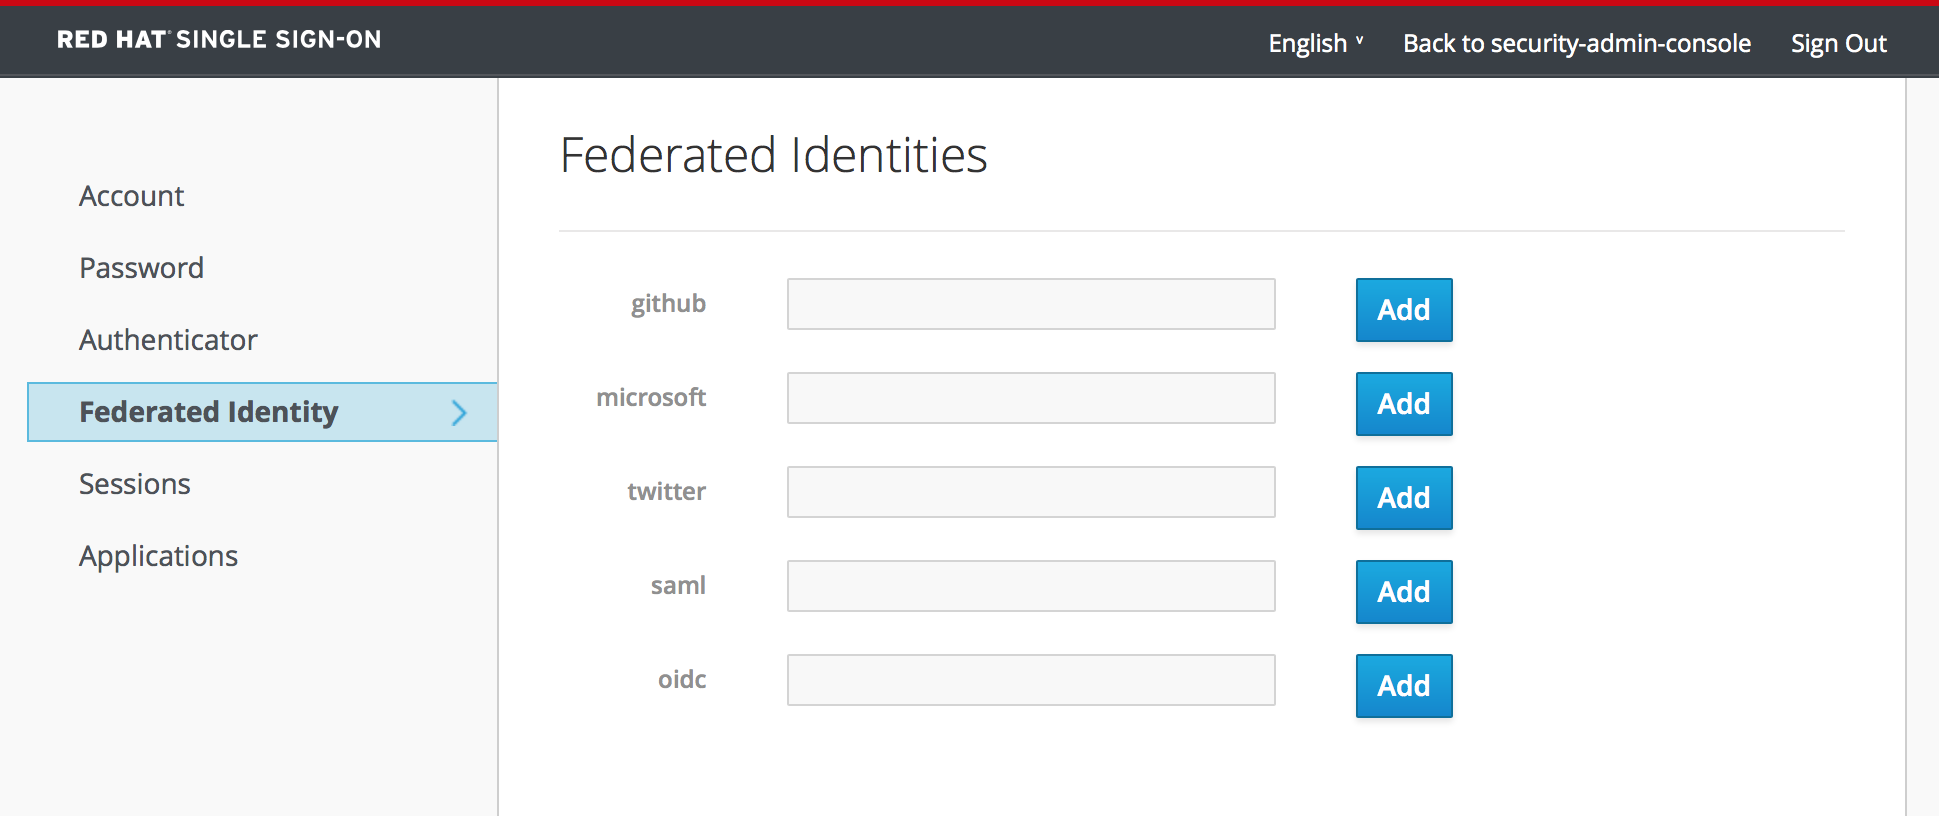 account service federated identity